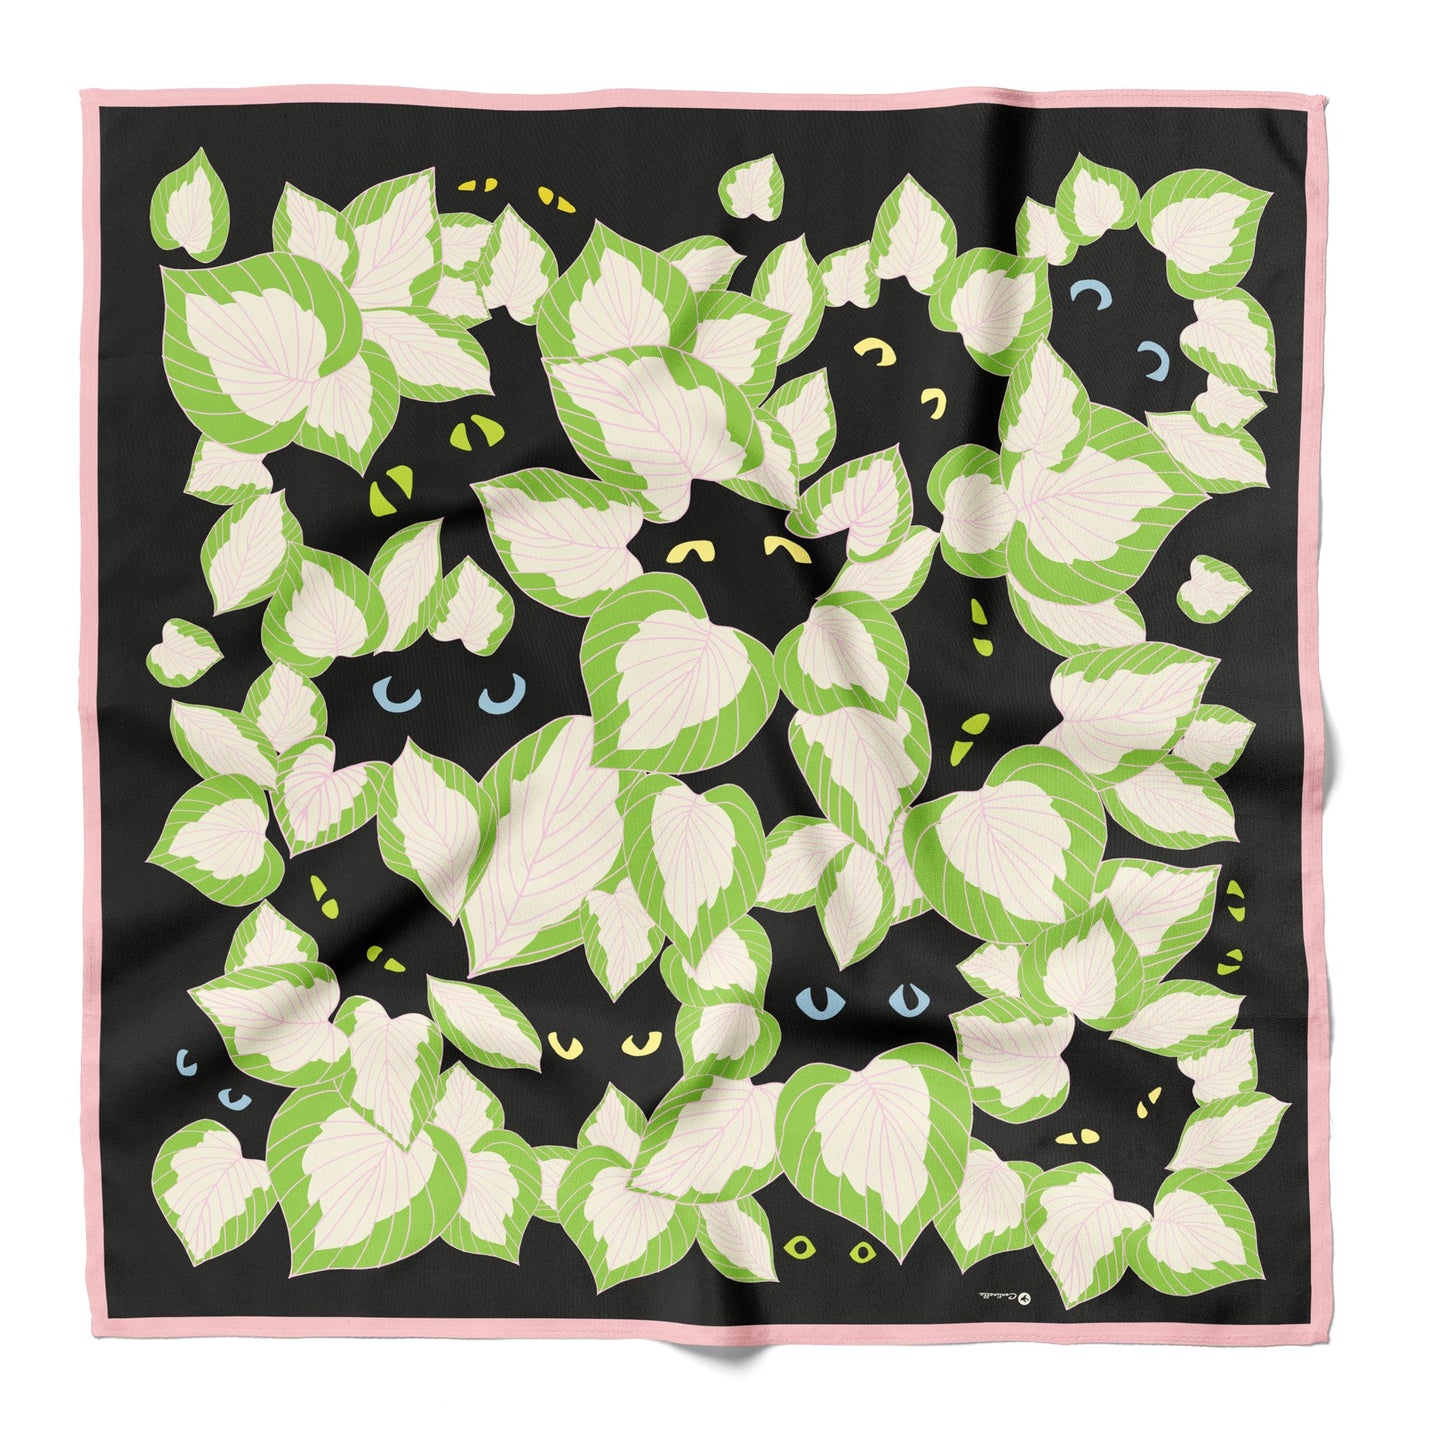 A black silk bandana with cats and white leaves.